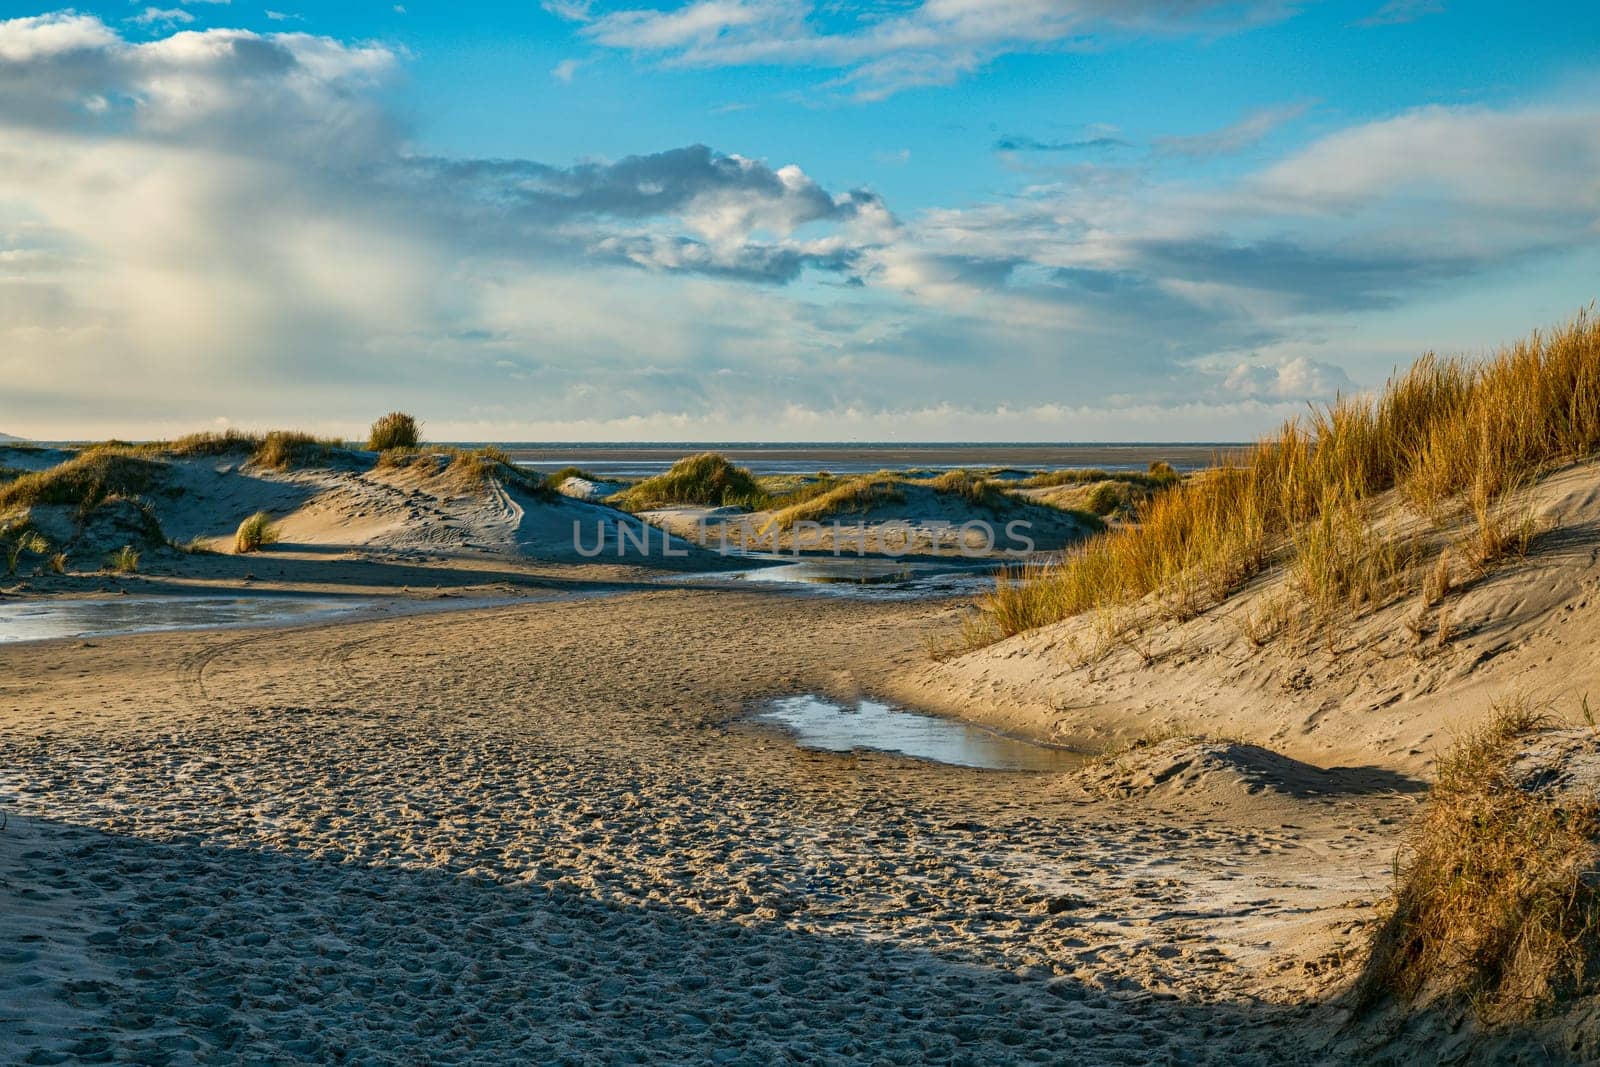 the rugged De Horst nature reserve on the island of Texel with sand dunes, marram grass and water on a sunny winter day